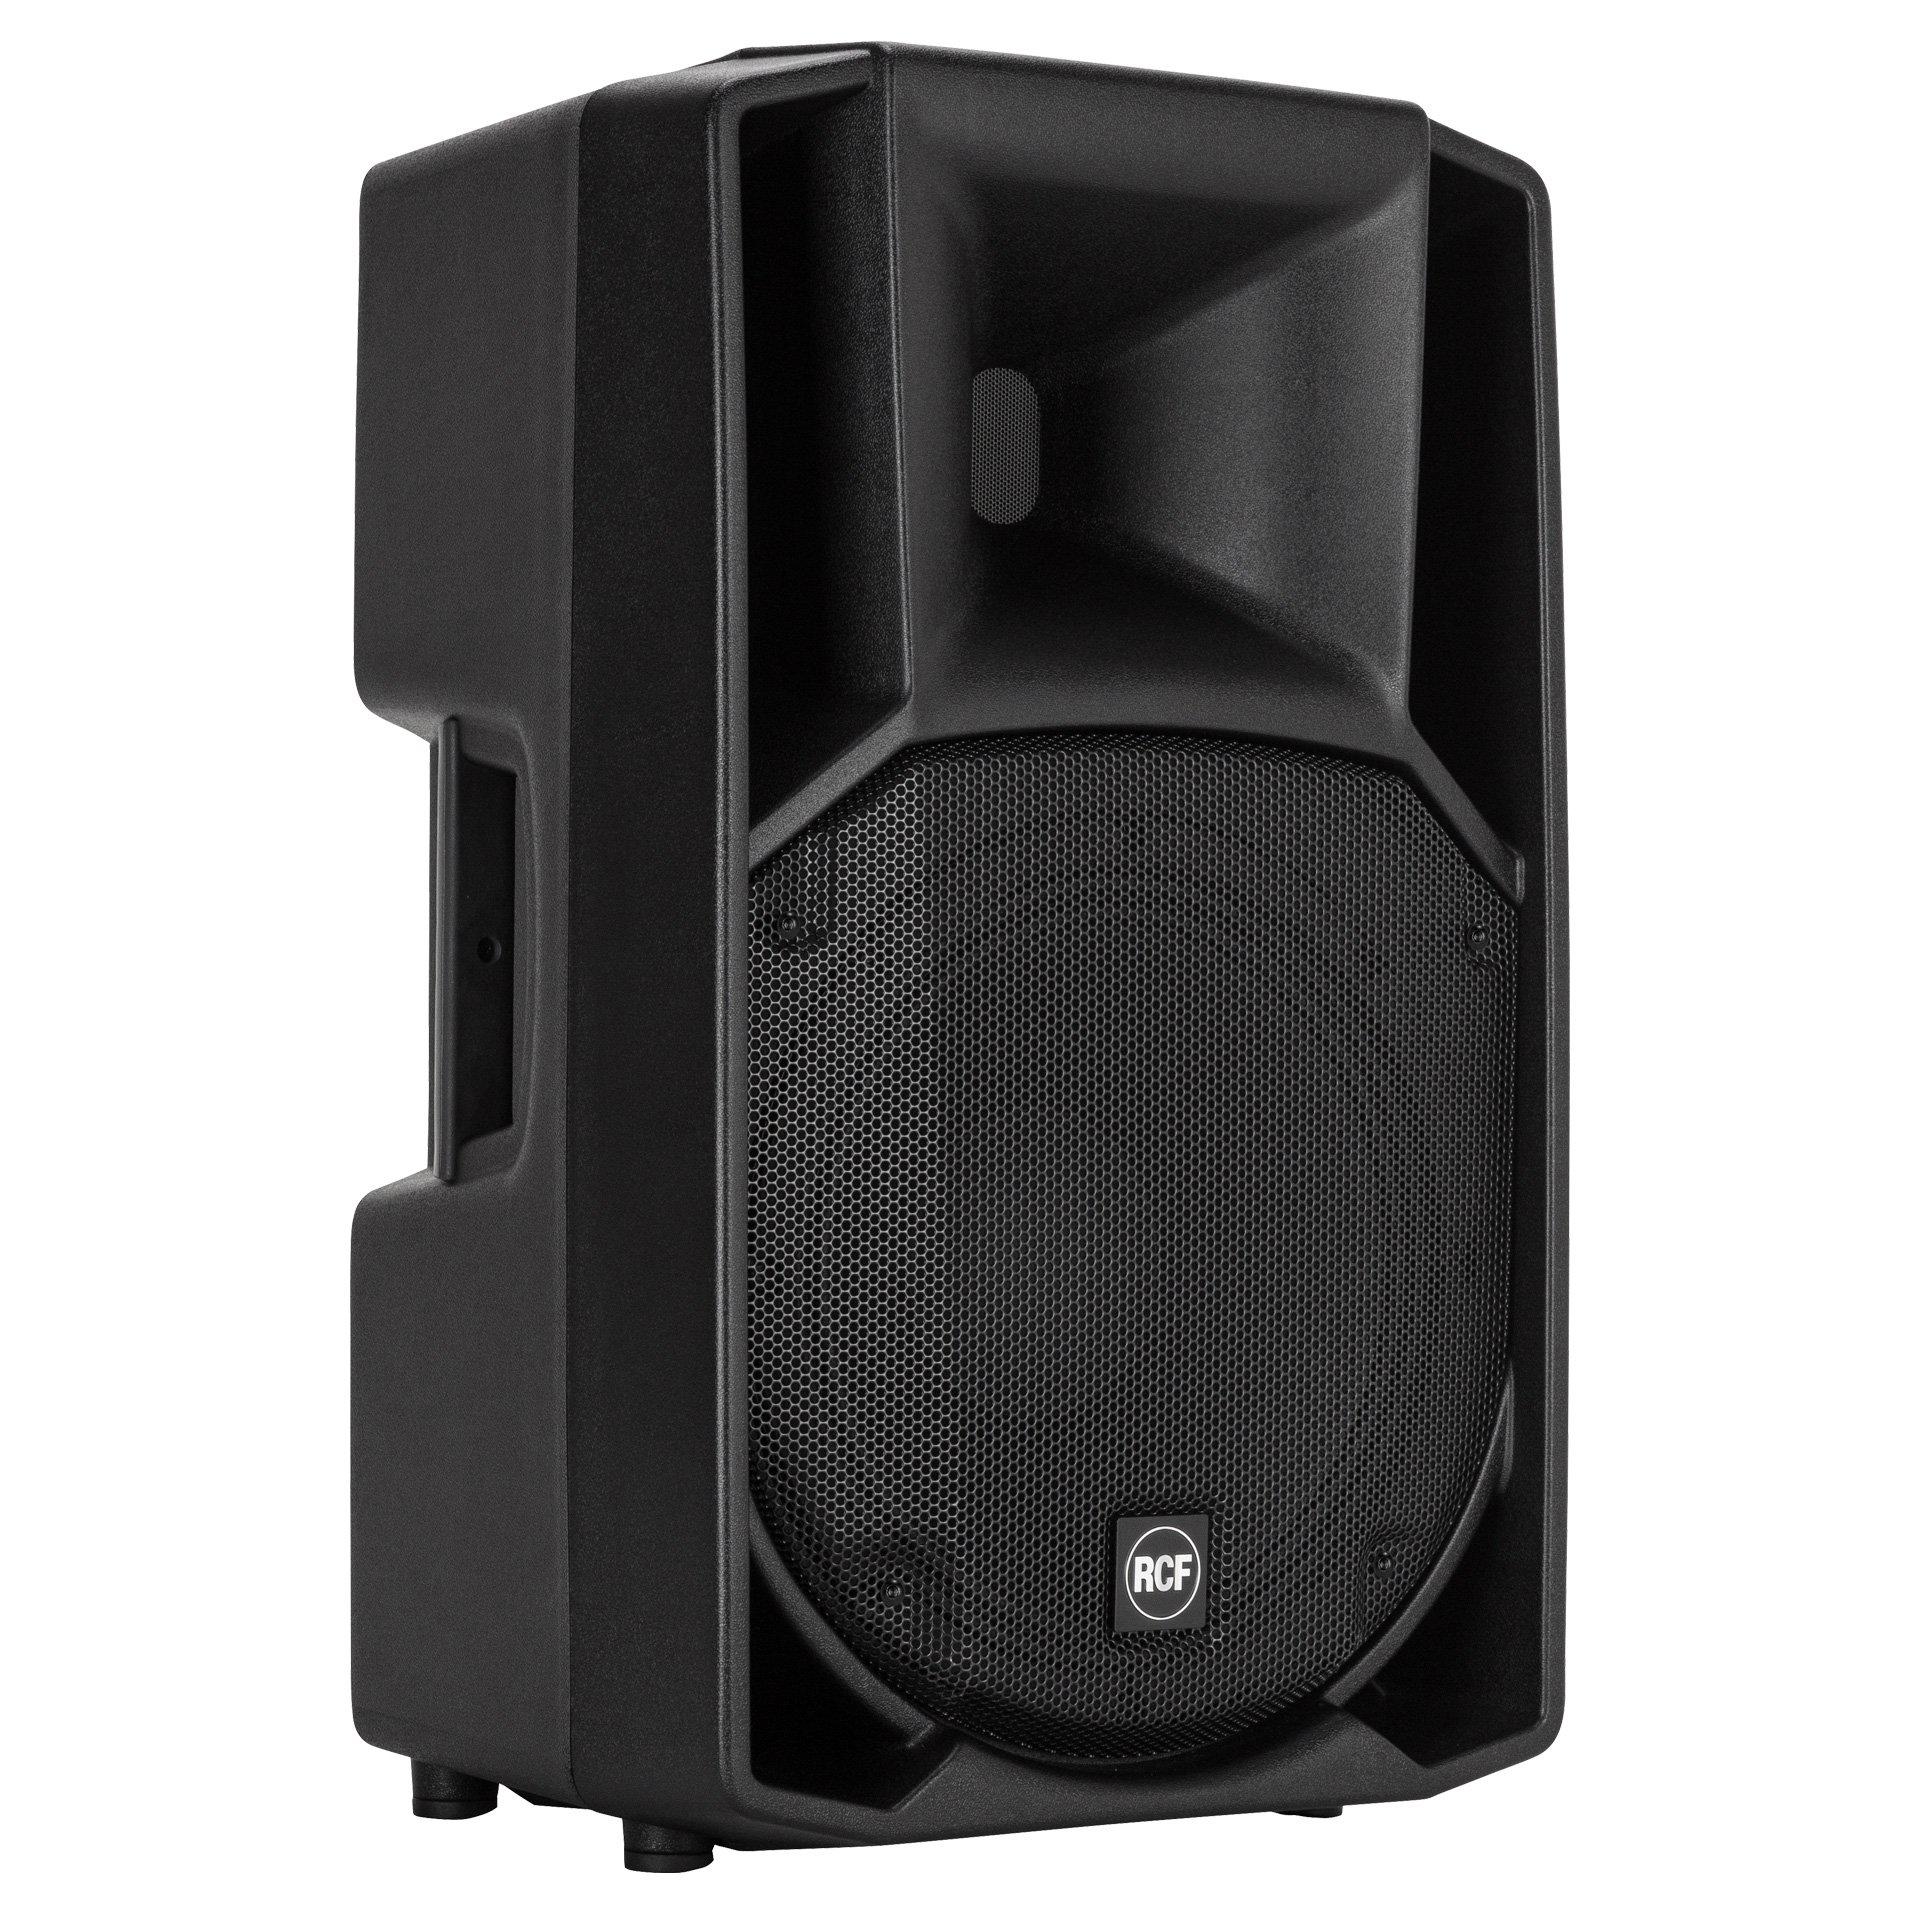 RCF Art 712-A MK4 Active Two Way Speaker from left